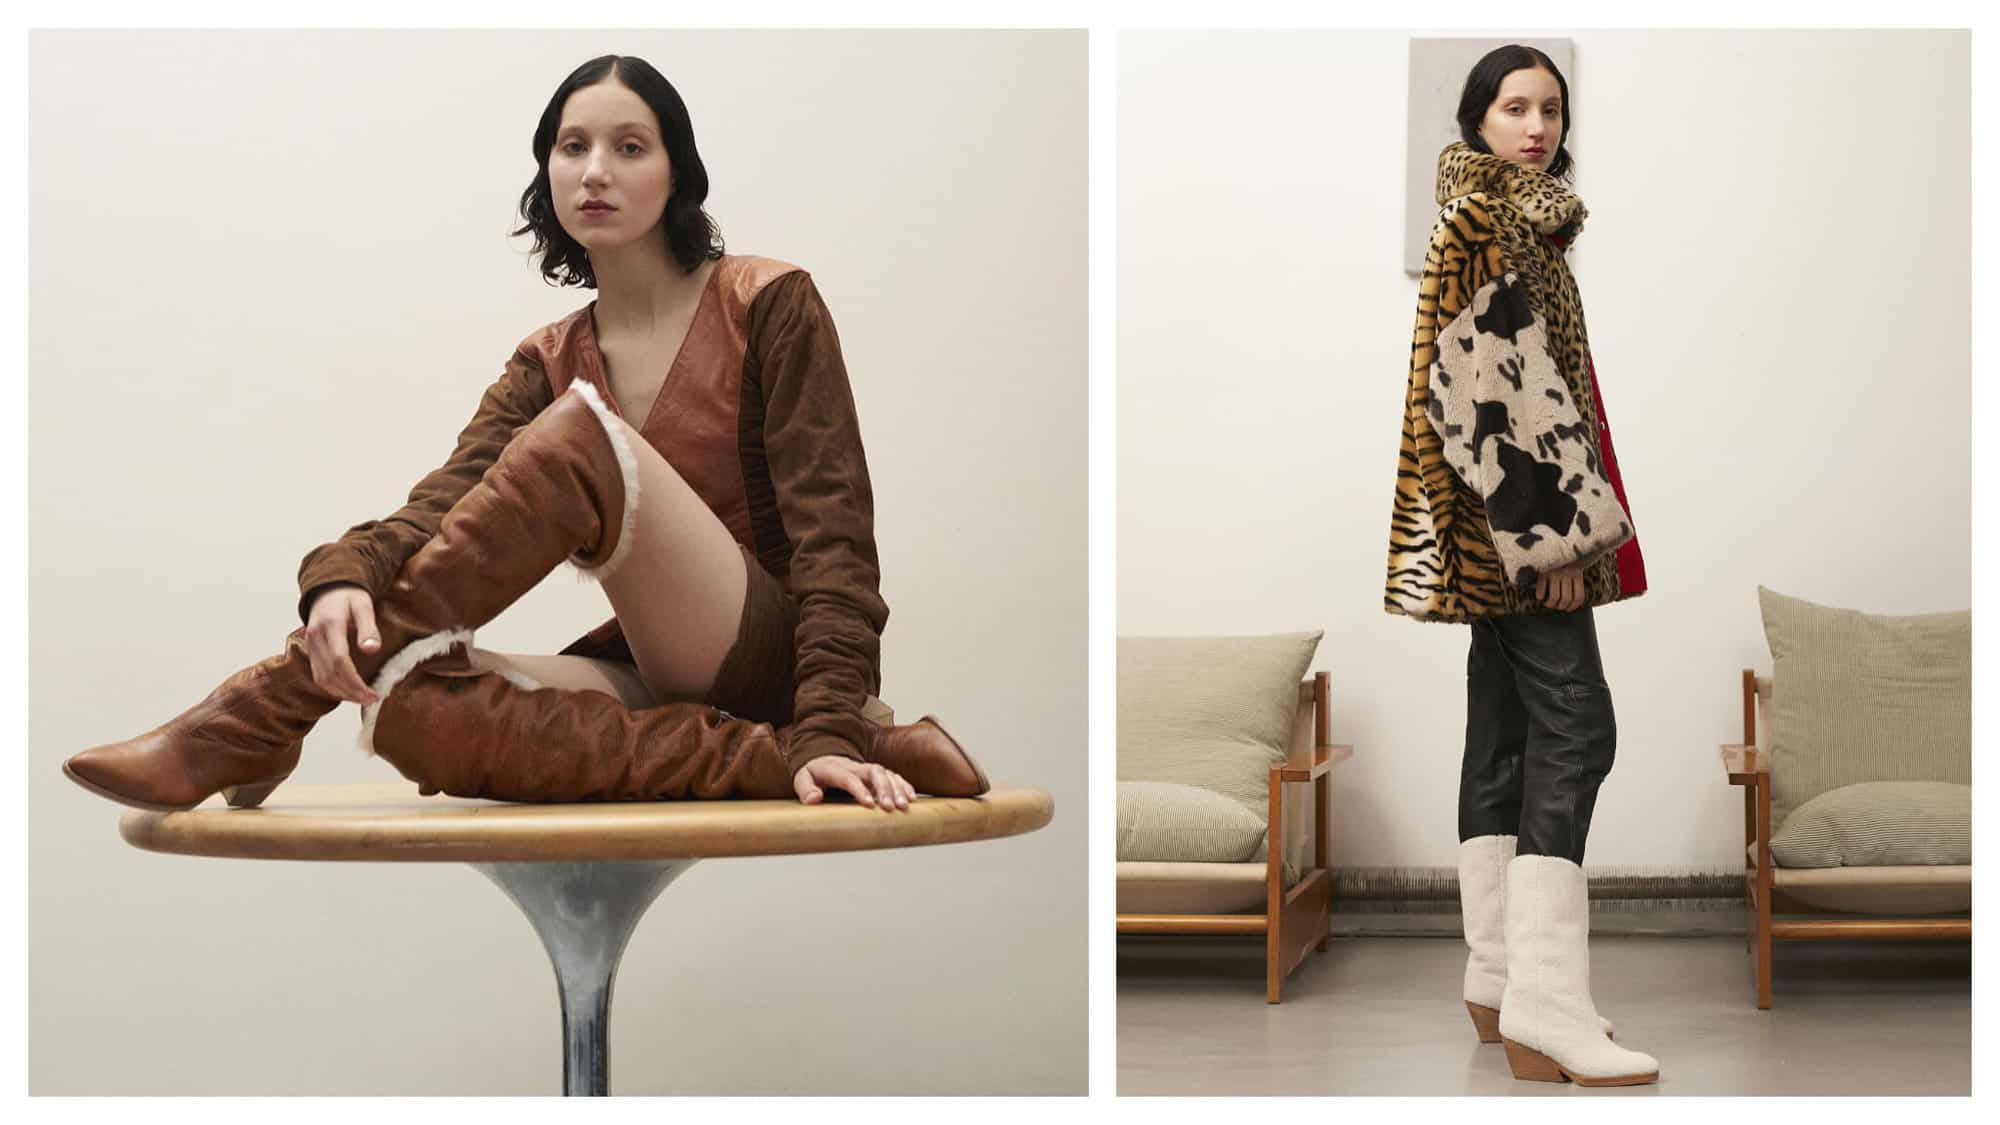 Left: a woman with short dark hair is sitting on a wooden table in an all white room and is staring directly at the camera. She is wearing a dark dan leather top and bottom, and she has on knee high boots made of the same dark tan leather. Shearling is peeking out of the top of the boots and the woman has her legs crossed. Right: A woman with short dark hair is looking directly into the camera as she stands in a white room with two small chairs on either side of her. She is wearing an over sized jacket made of various animal prints and leather pants with tall white boots with a wooden heel.